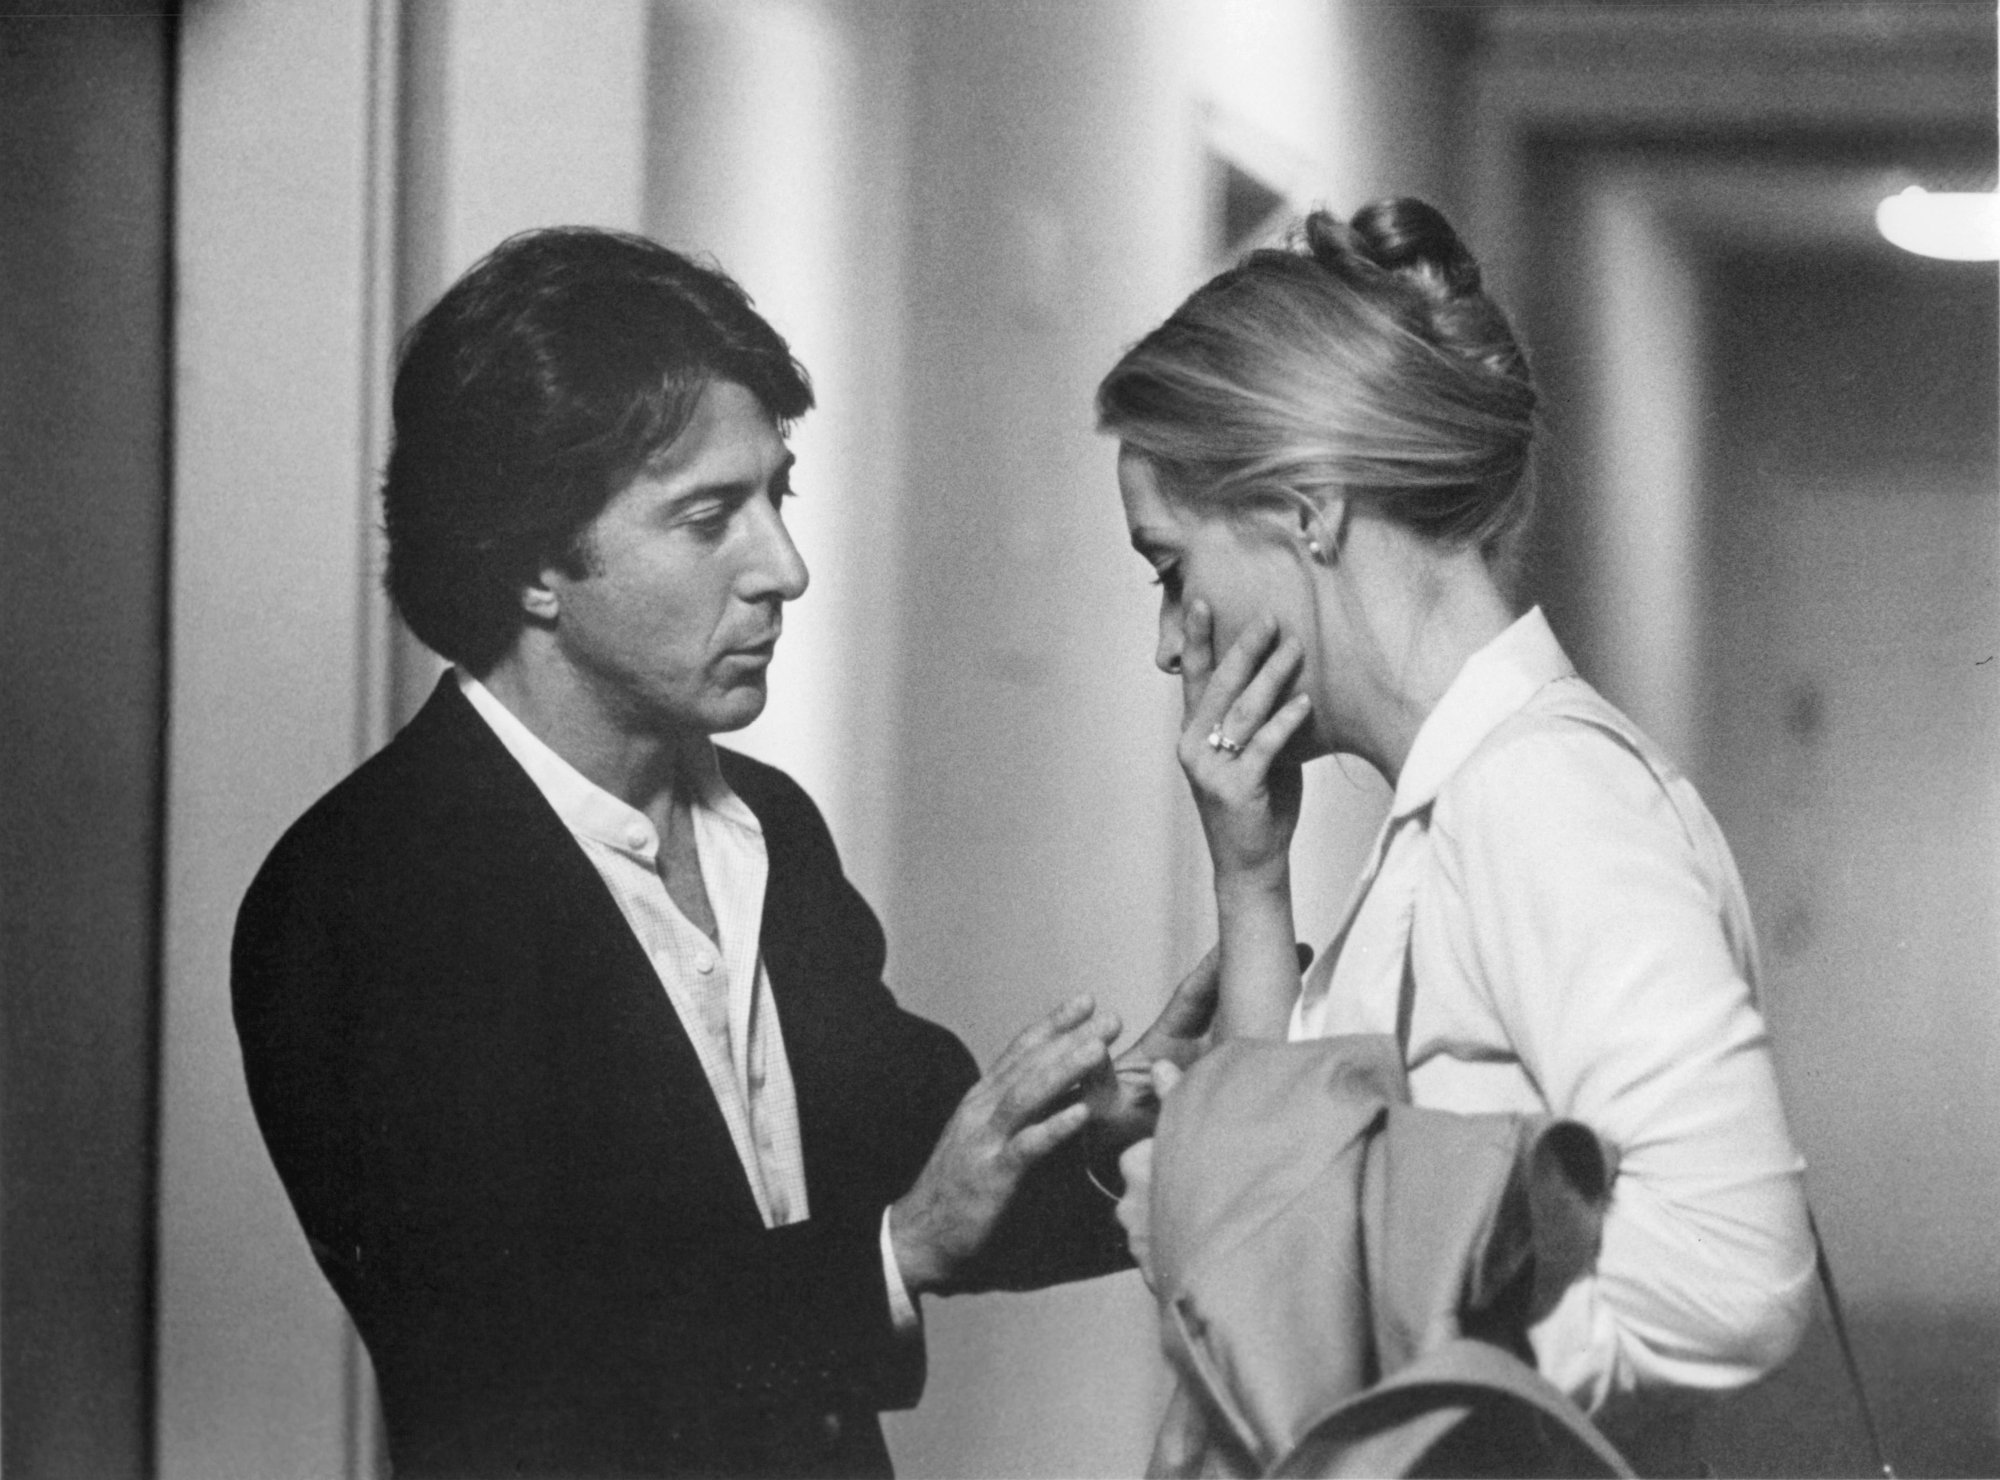 'Kramer vs. Kramer' Dustin Hoffman as Ted Kramer and Meryl Streep as Joanna with her holding her mouth over her mouth while he tries to console her